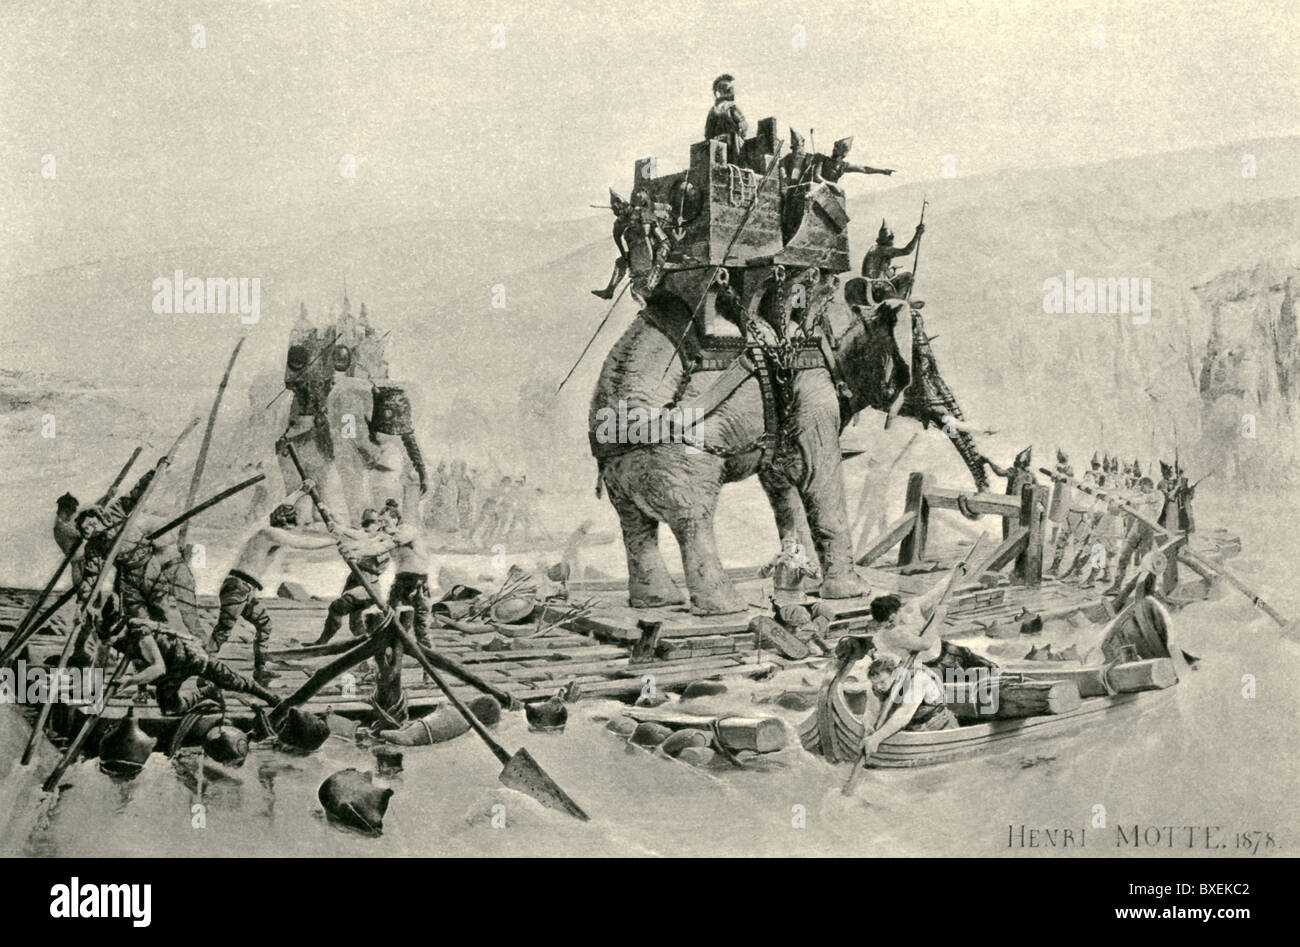 Carthaginian general Hannibal Barca crossed the Alps, with his army and elephants, into Italy in 216 B.C. to fight the Romans. Stock Photo